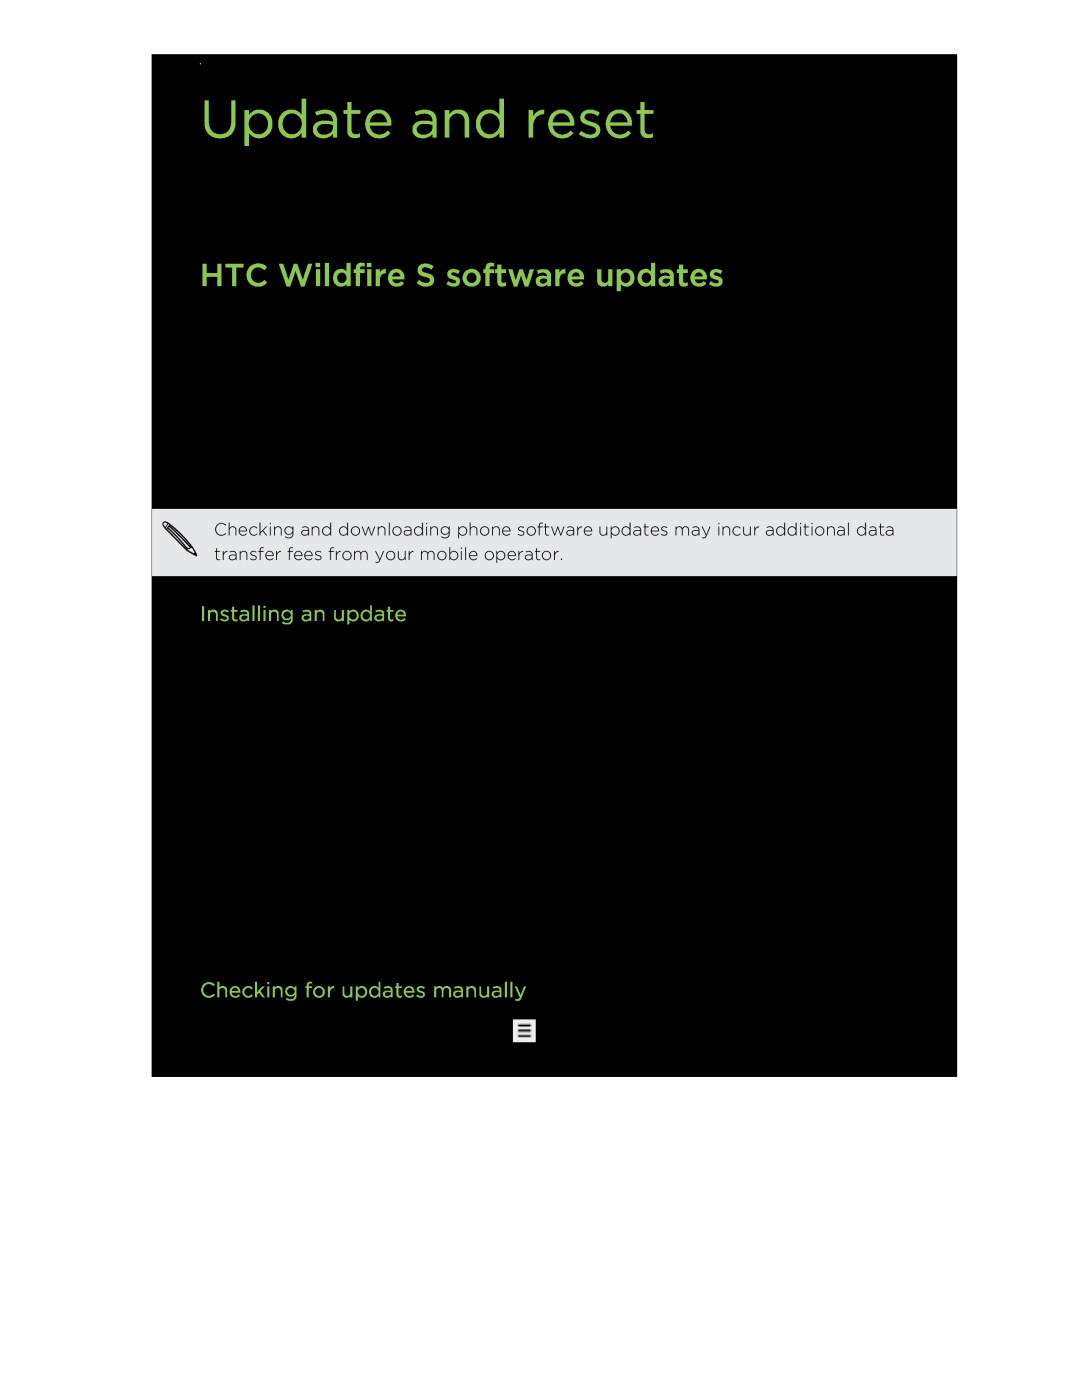 HTC Update and reset, HTC Wildfire S software updates, Installing an update, Checking for updates manually 